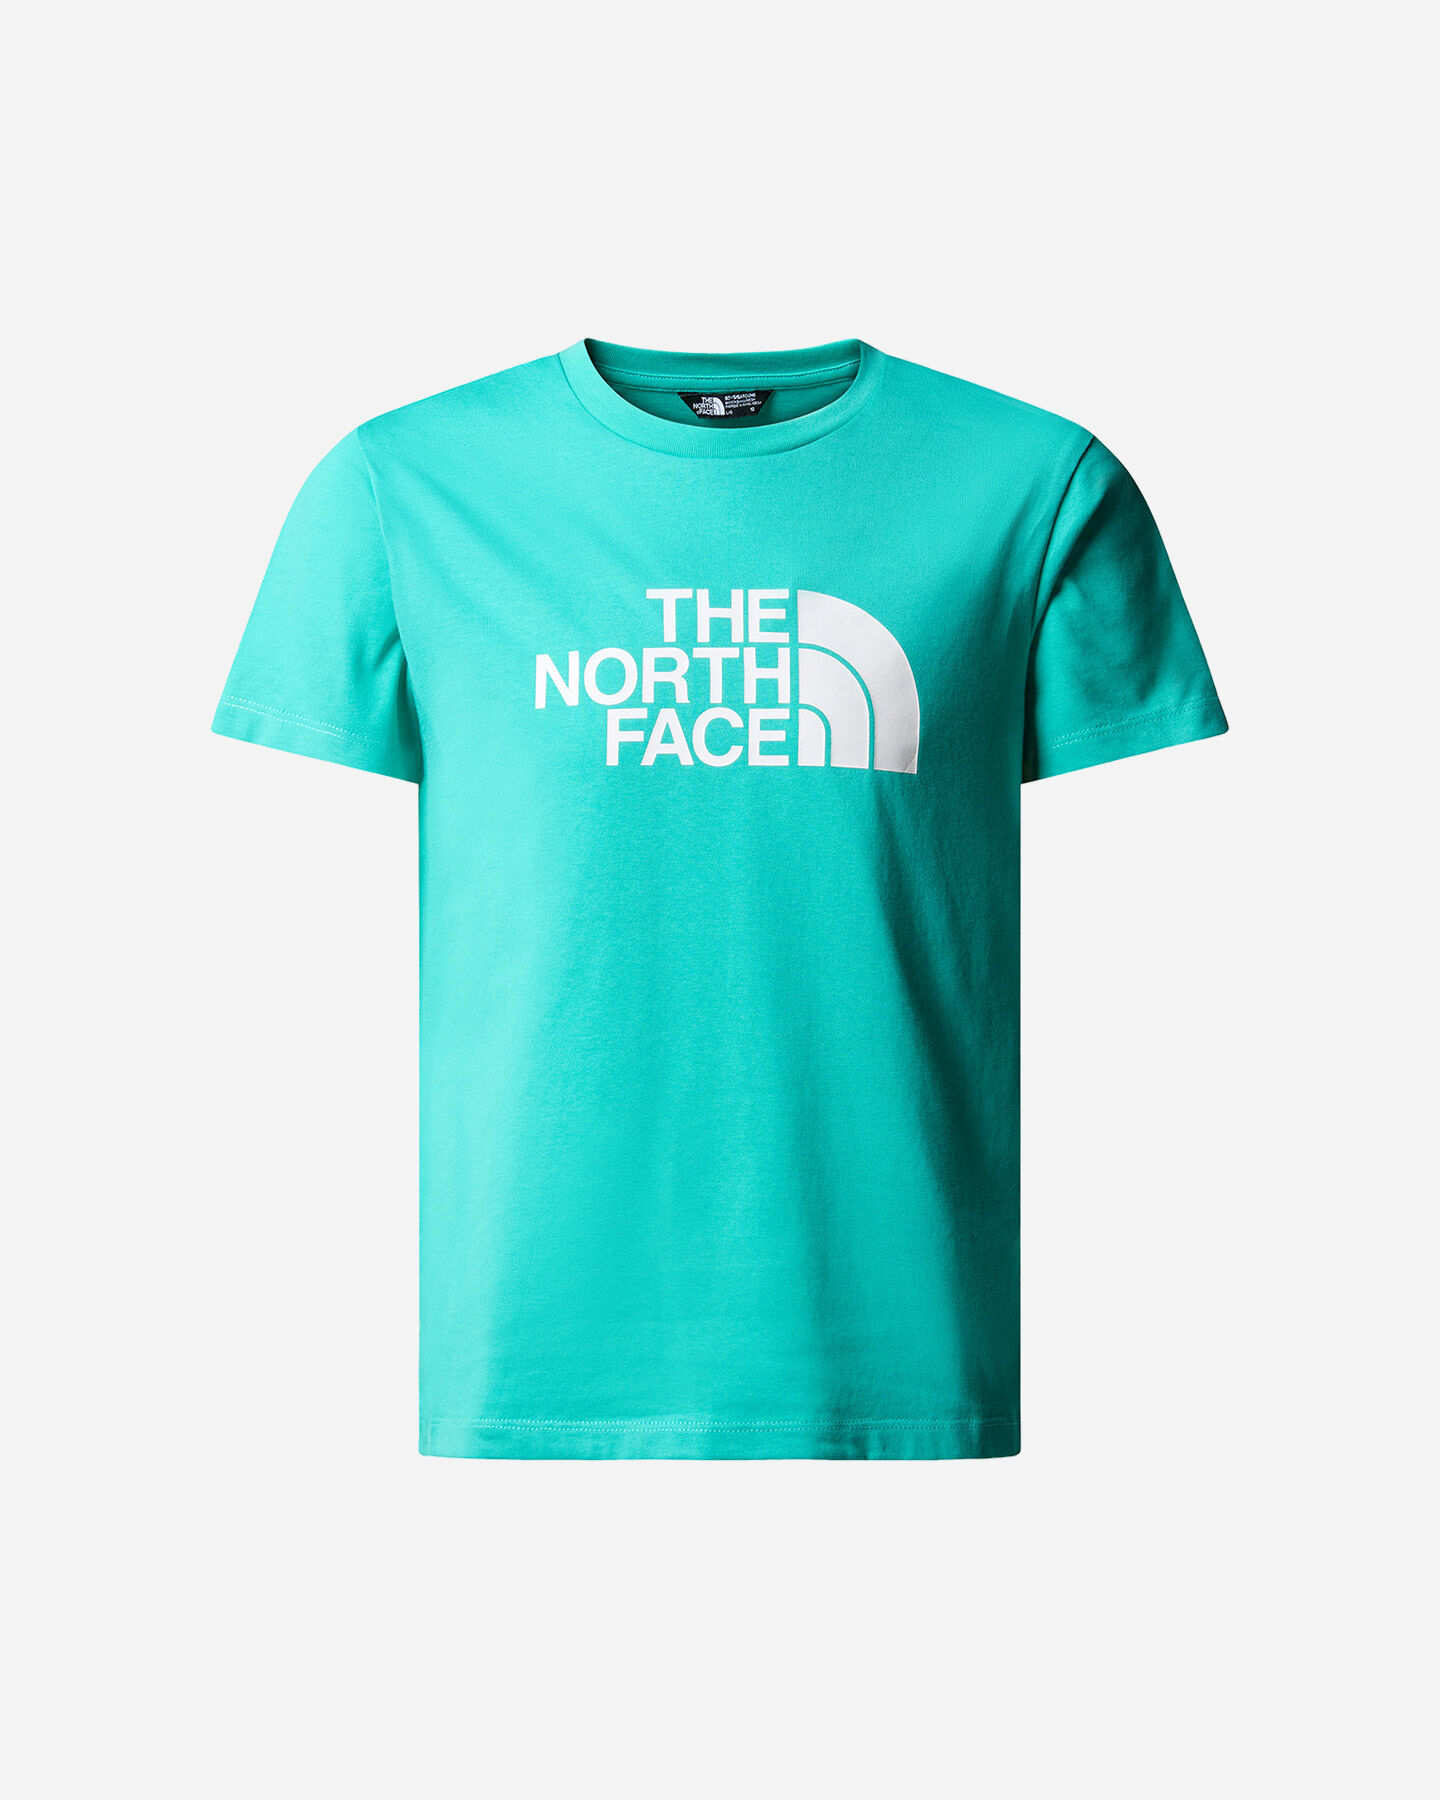  T-Shirt THE NORTH FACE EASYTEE GEYSER JR S5651150|PIN|S scatto 0